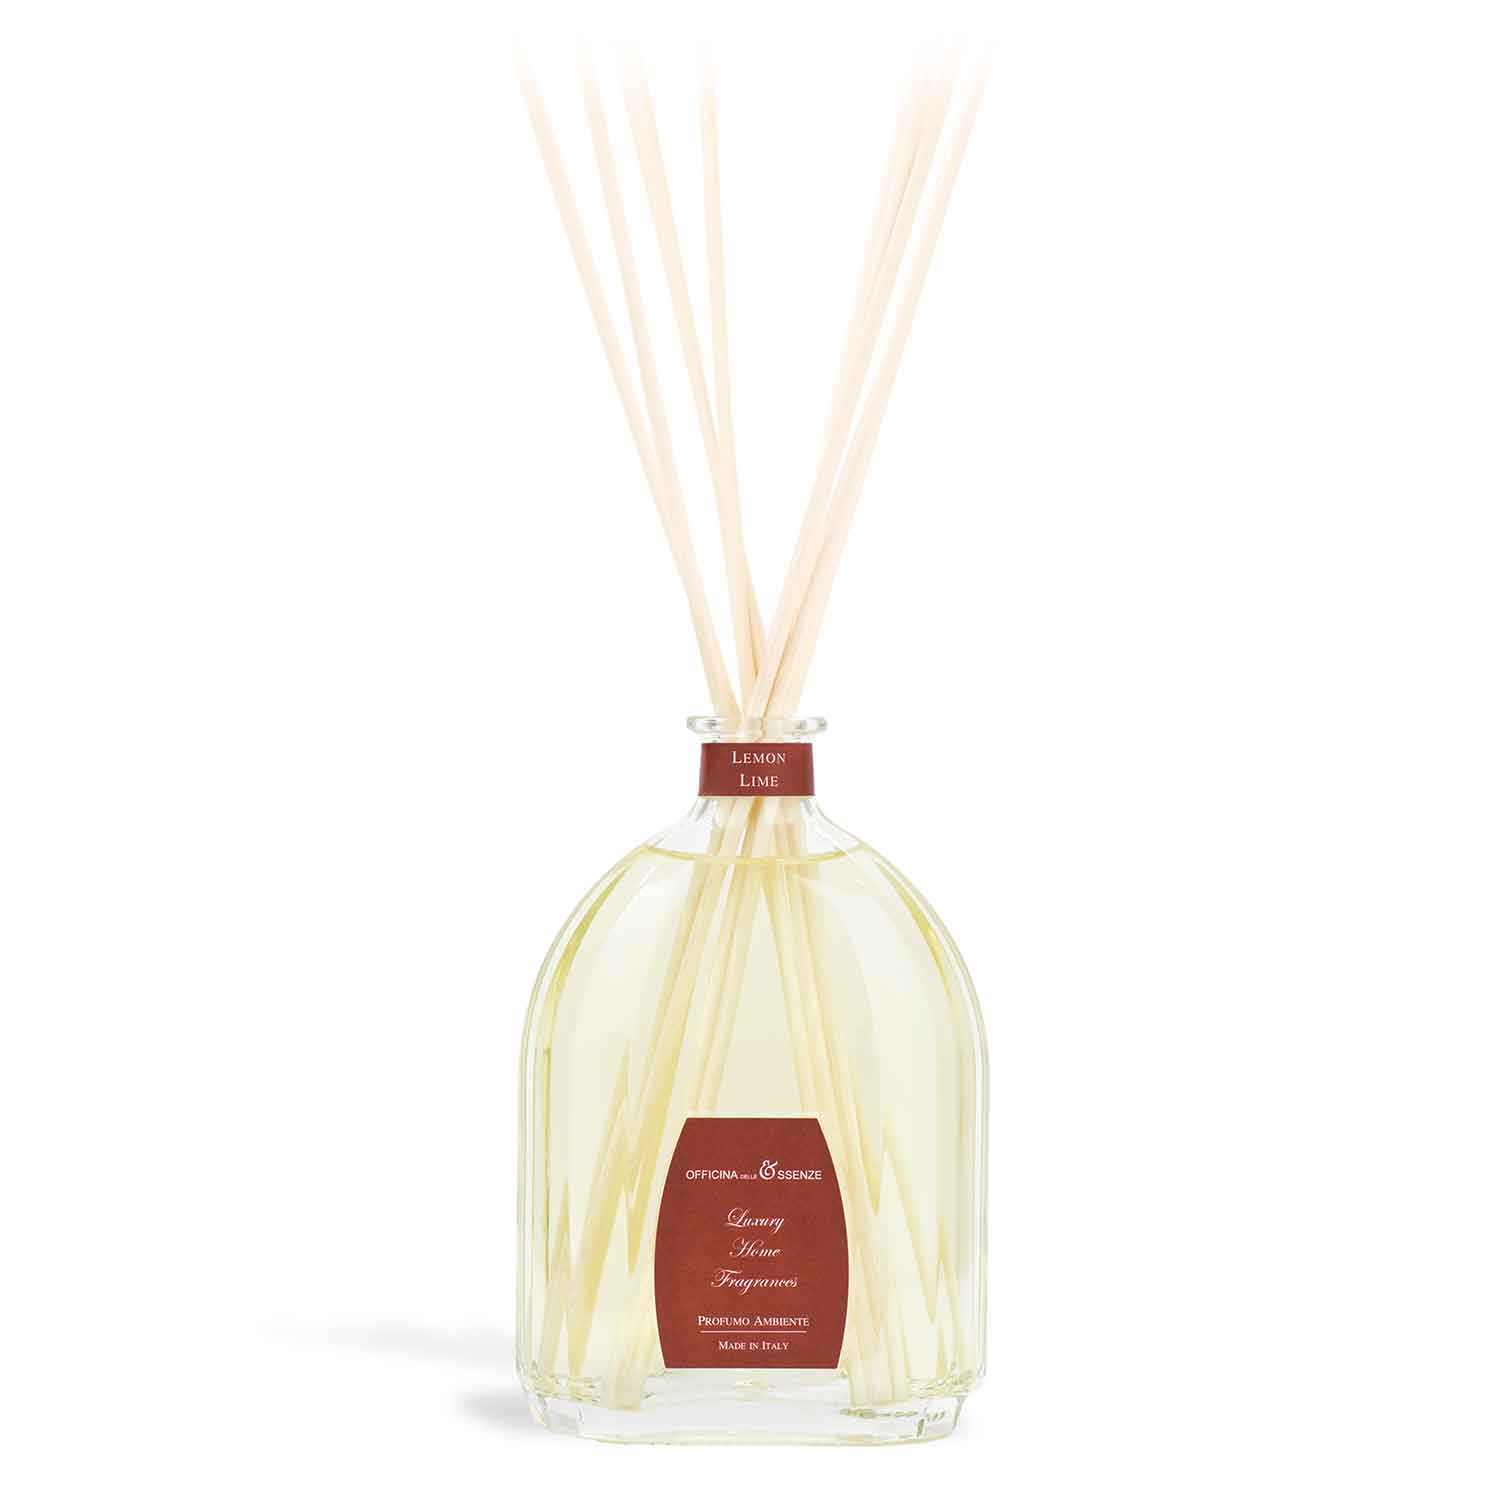 Lemon Lime - Home fragrance diffuser with essential oils, 500 ml